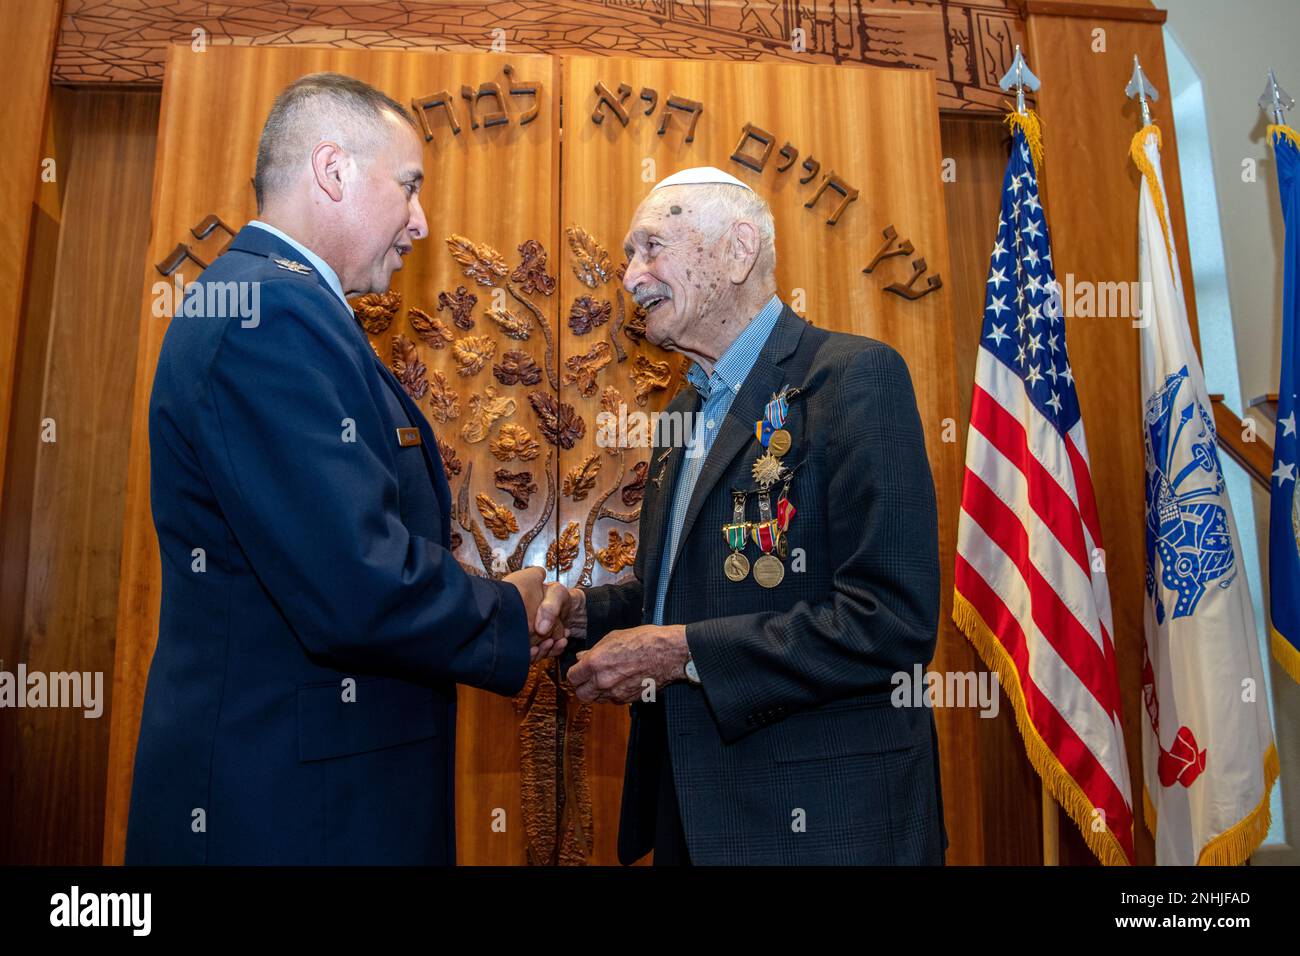 U.S. Air Force Col. Charles Montoya, Jr. (left), presents a coin to U.S. Army Air Corps 1st Lt. Gerald Teldon, retired, after his awards ceremony for his honorable service as a pilot on July 29, 2022, at the Chabad Center for Jewish Life and Learning, San Antonio, Texas. Teldon, born in Bronx, N.Y., in 1924, joined the military in 1944. He completed 62 missions during WWII and the Korean War. Lt. Col. Andrew Stein, 502nd Operations Support Squadron commander, was the presiding officers. The awards presented to Teldon are as follows: the Air Medal; American Campaign Medal; European – African – Stock Photo